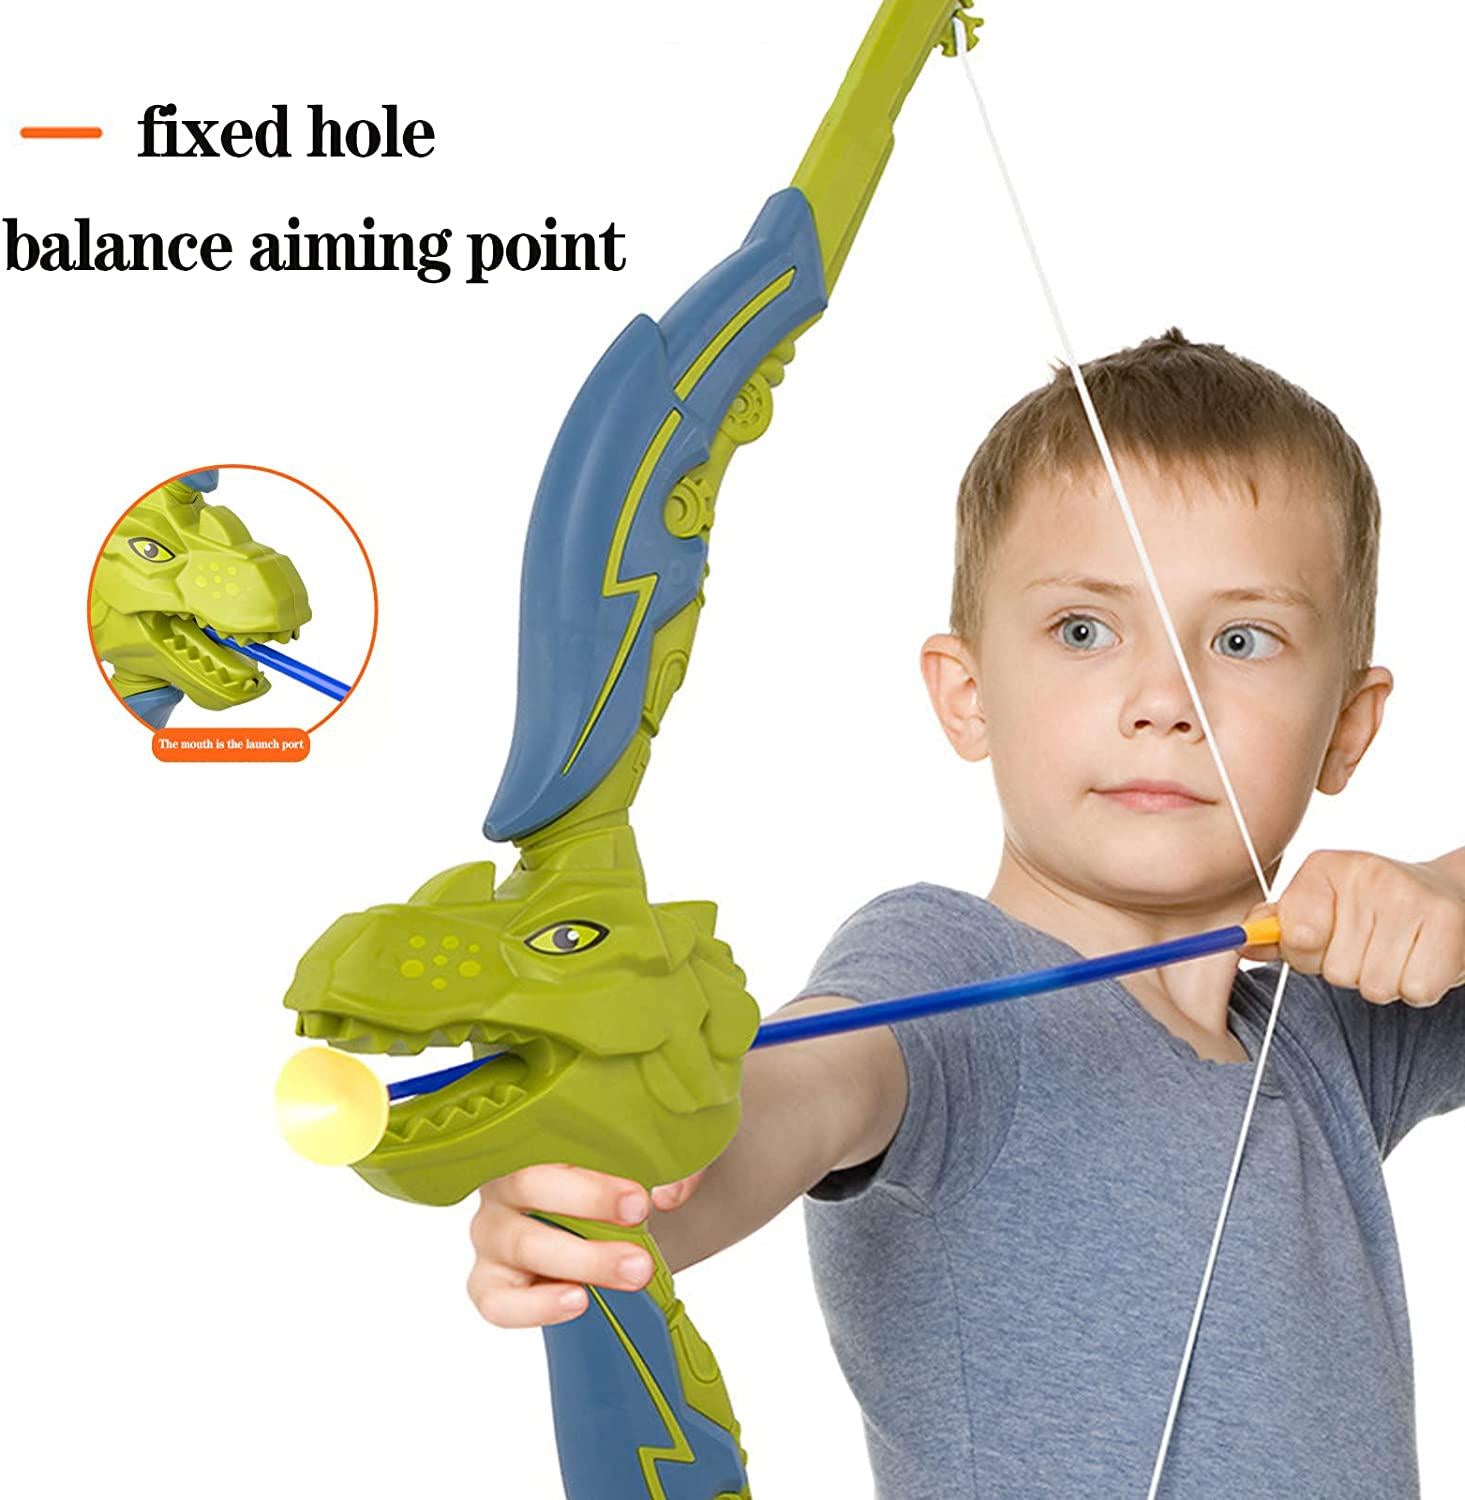 MERPELO, MERPELO Kids Dinosaur Bow and Arrow Set with 6 Suction Cup Arrows, Free Standing Target and a Bowstring Ideal for Indoor, Outdoor Hunting Adventure Games for Boys and Girls